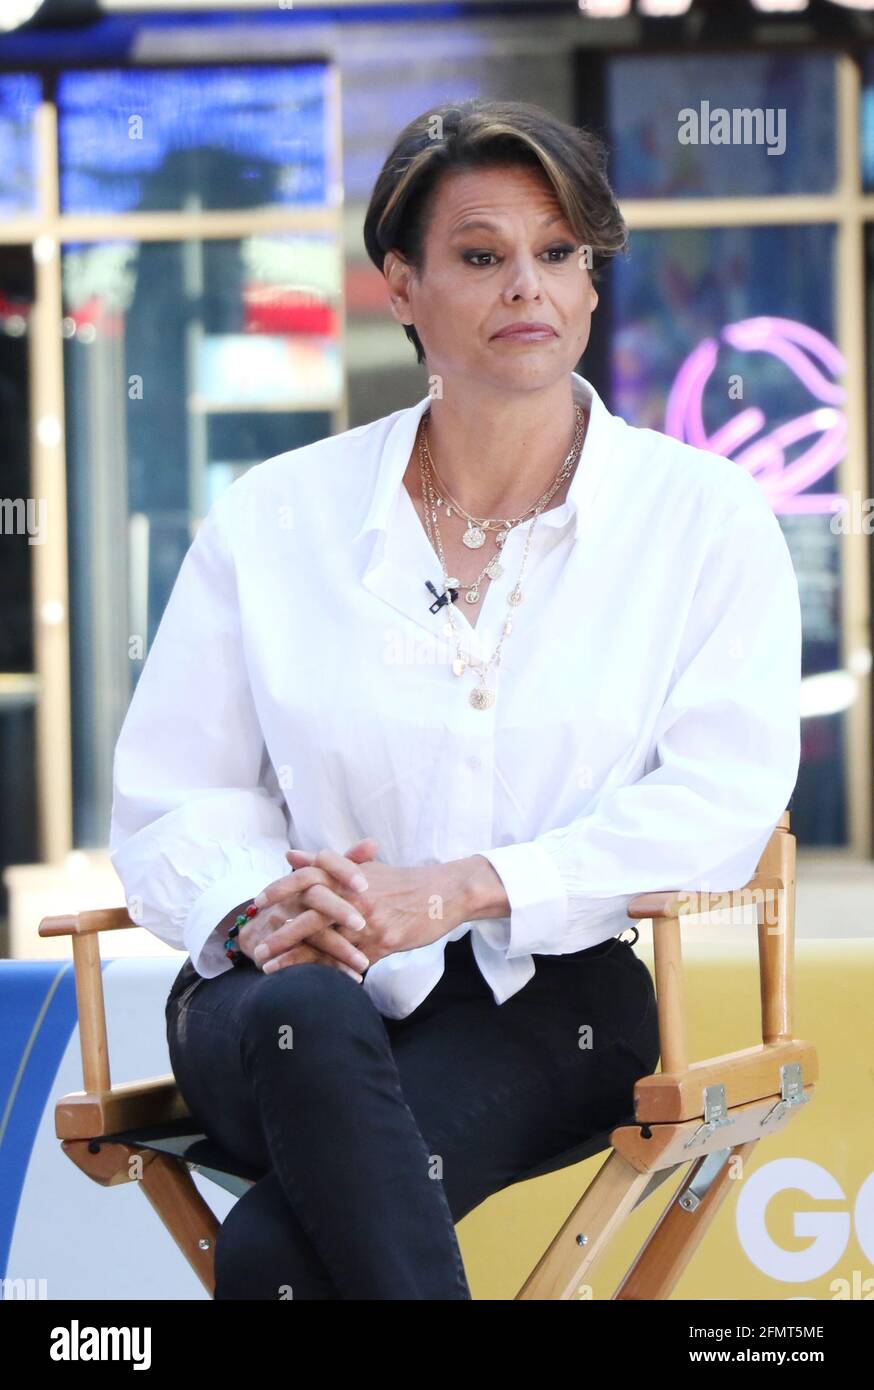 New York, NY, USA. 11th May, 2021. Alexandra Billings star of Wicked on Good Morning America promoting the re-opening of Broadway shows on September 14 after the Covid-19 pandemic in Times Square in New York City on May 11, 2021 Credit: Rw/Media Punch/Alamy Live News Stock Photo